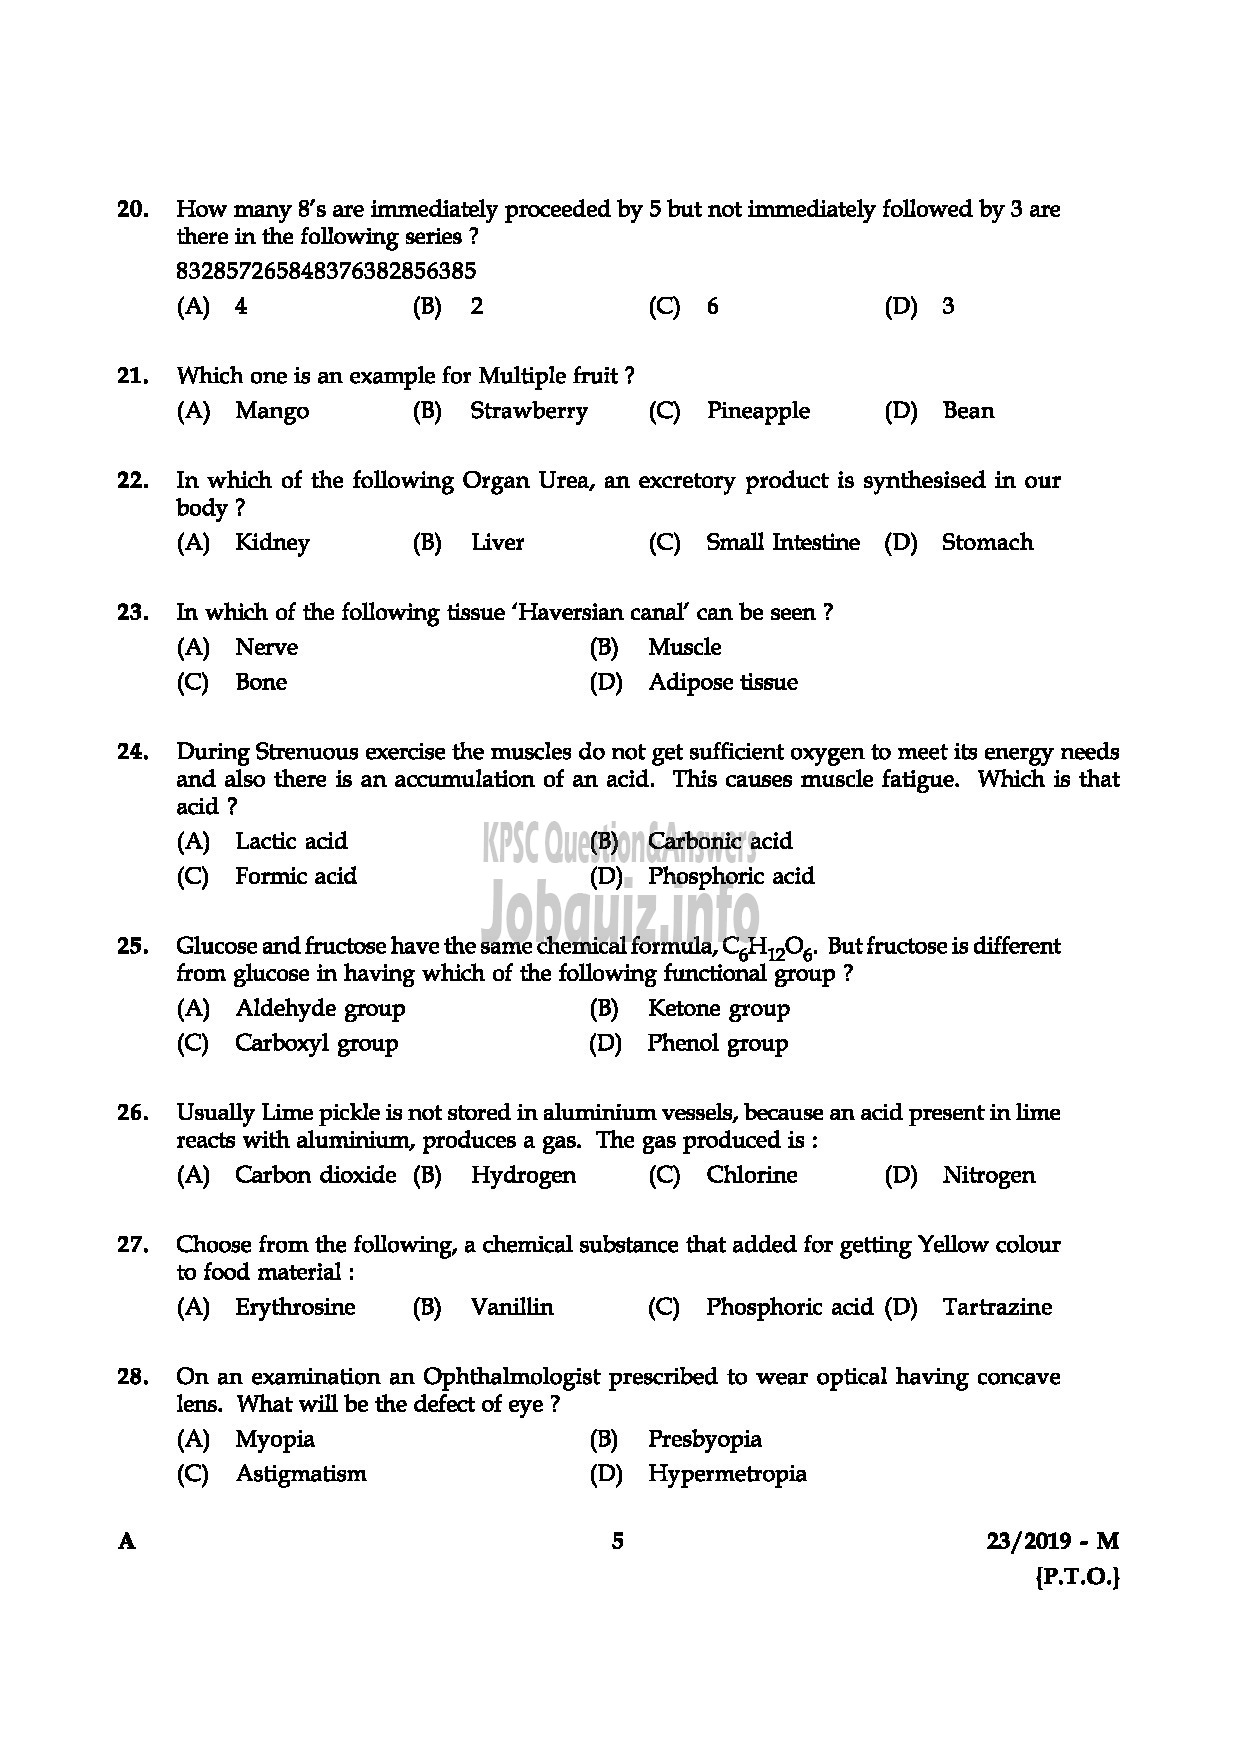 Kerala PSC Question Paper - Senior Supdt/Accounts Officer Kerala State Insurance Sr.Supdt (Sr from ST only) Dairy Development-5